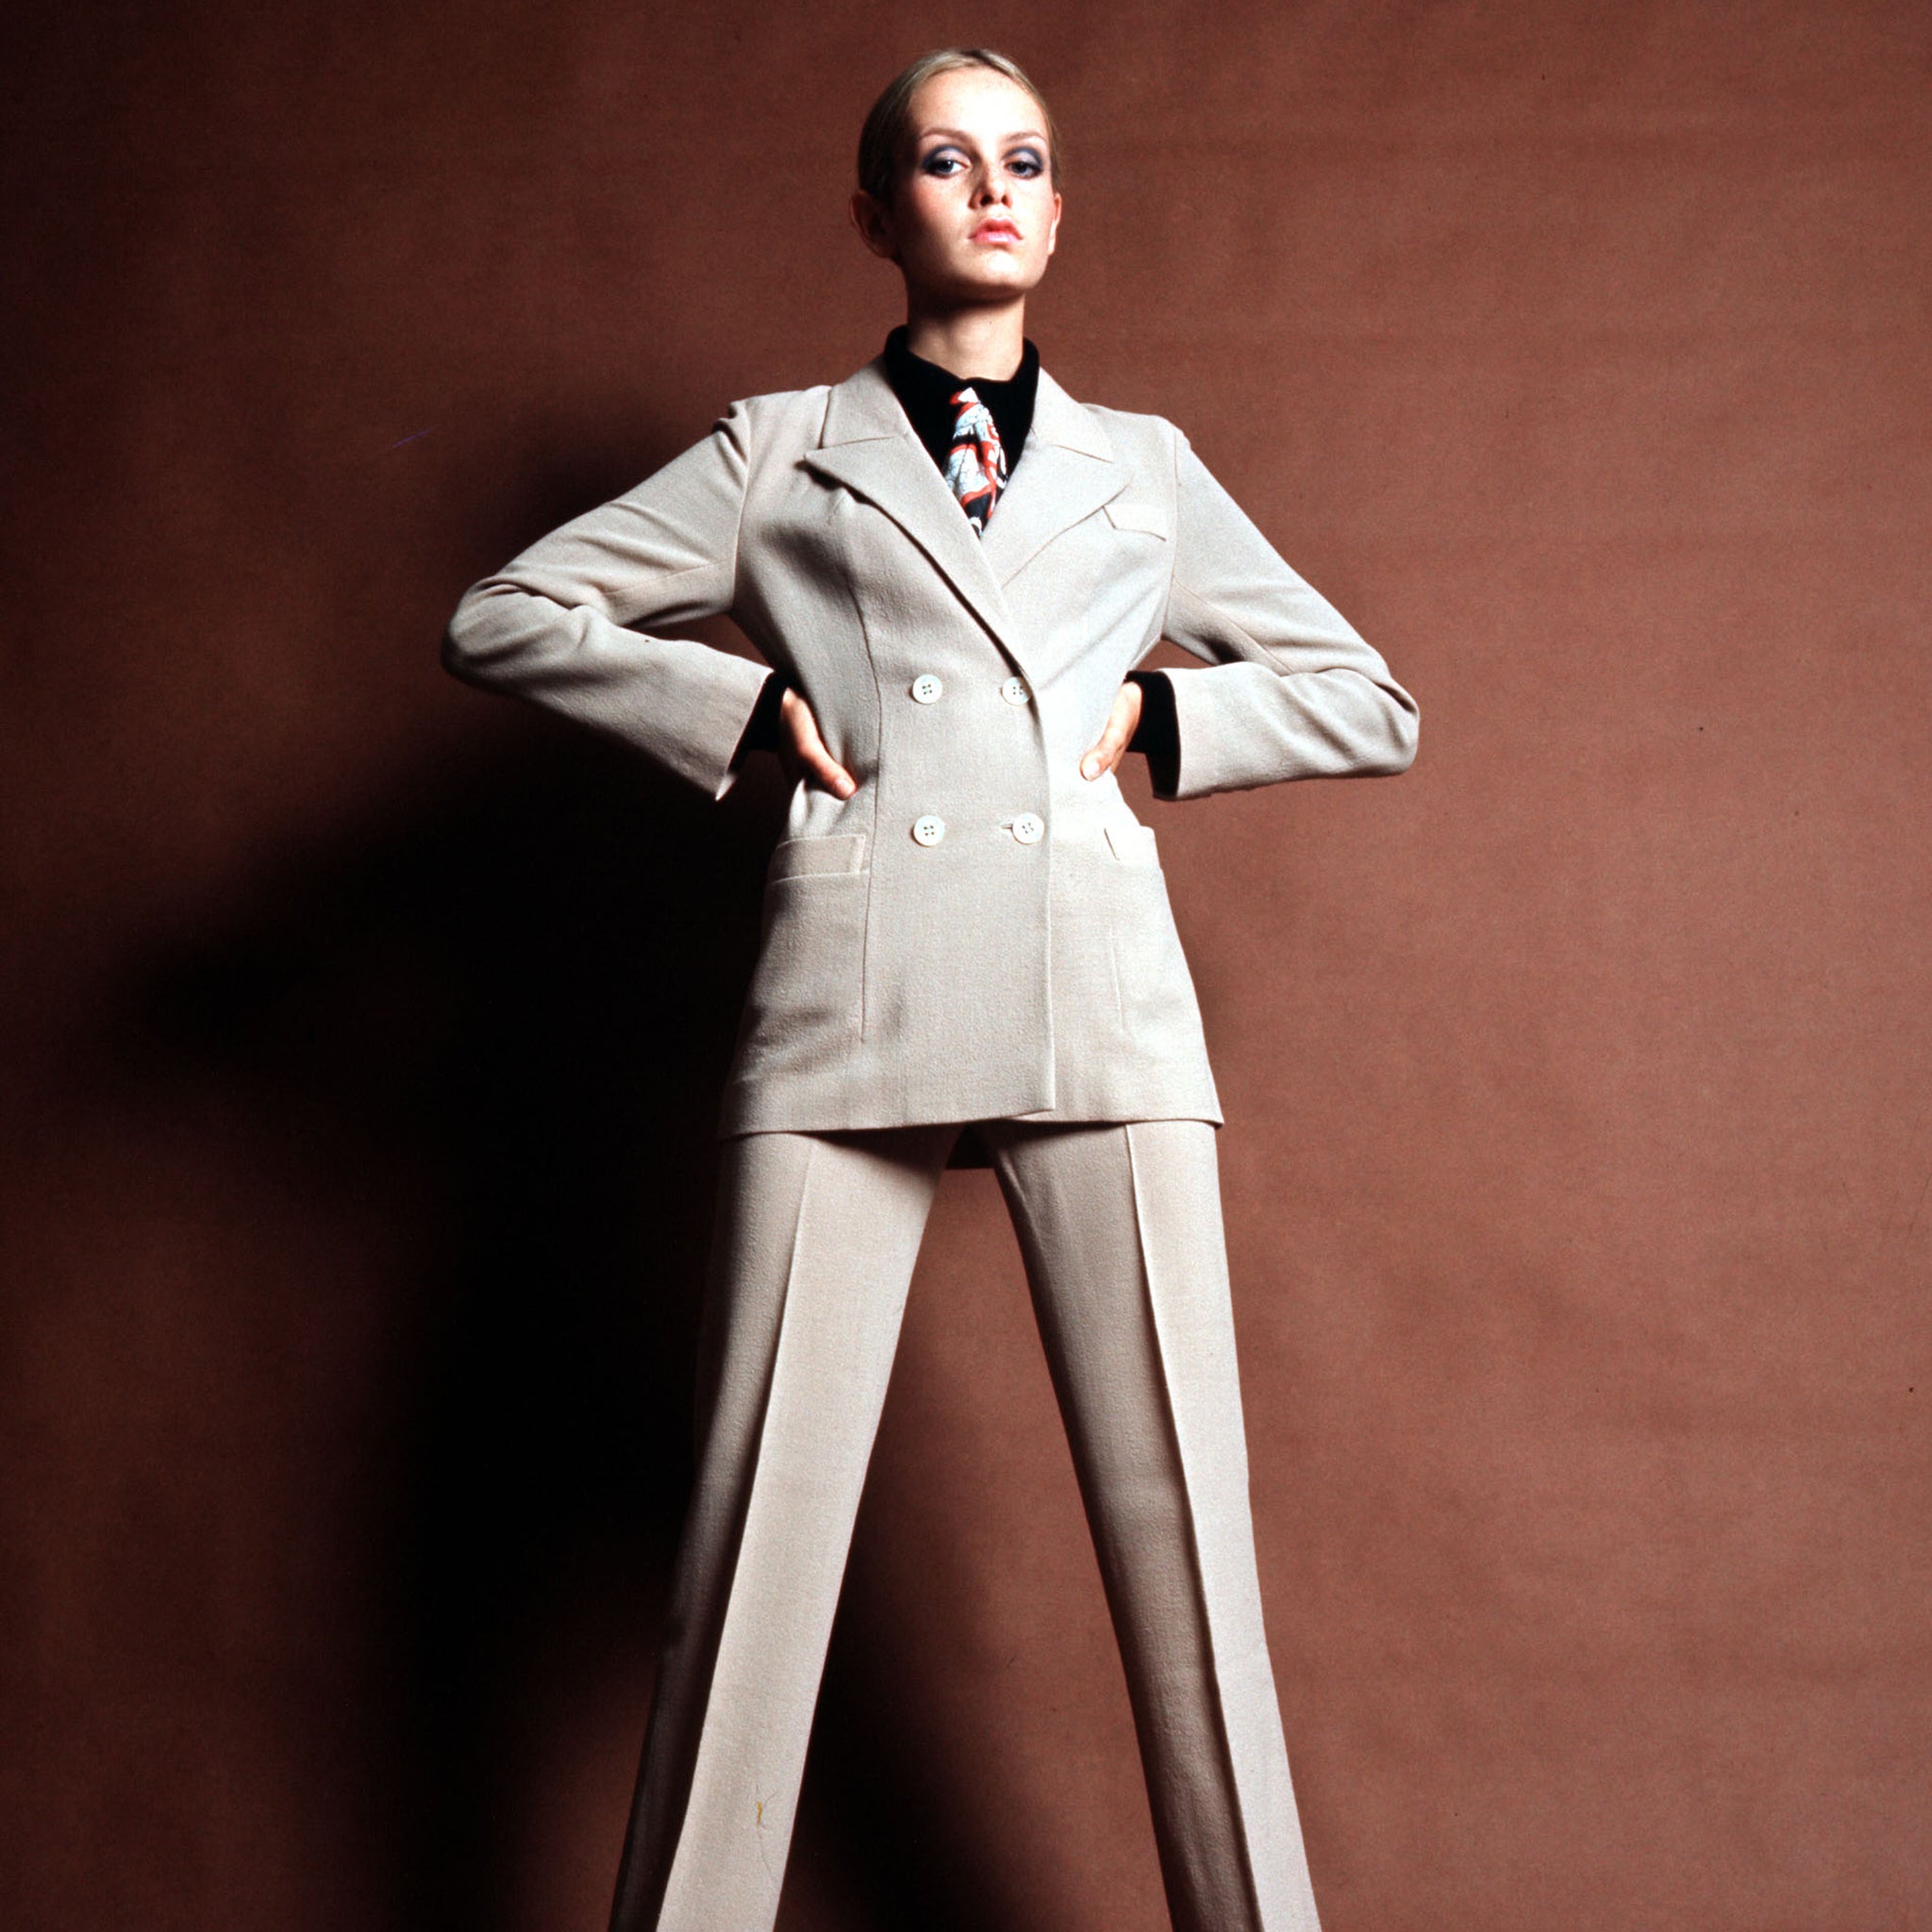 England, 1968, British model Twiggy is pictured in a cream trouser suit